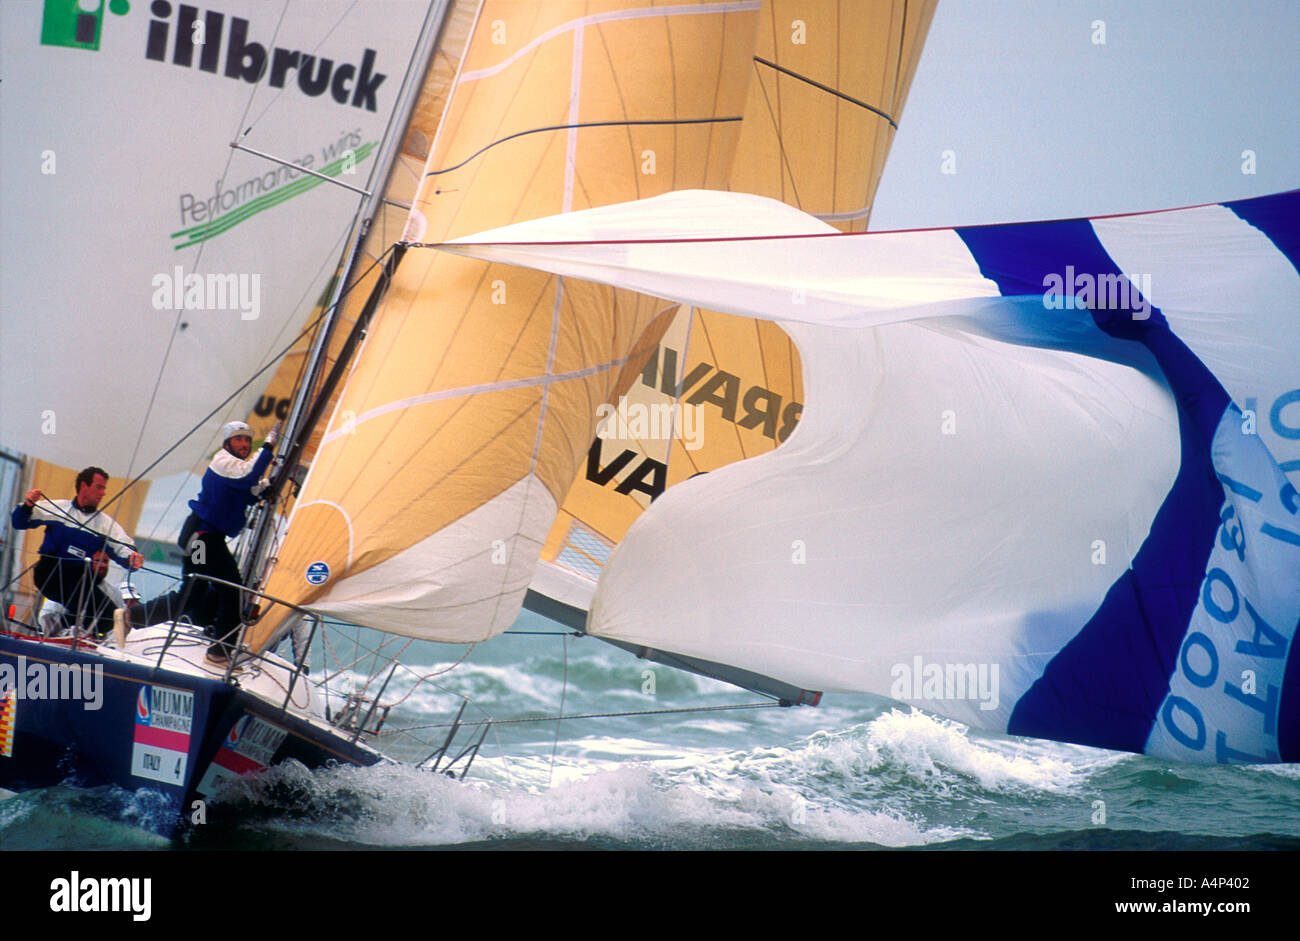 Admirals Cup international yacht racing Cowes Isle of Wight England Stock Photo